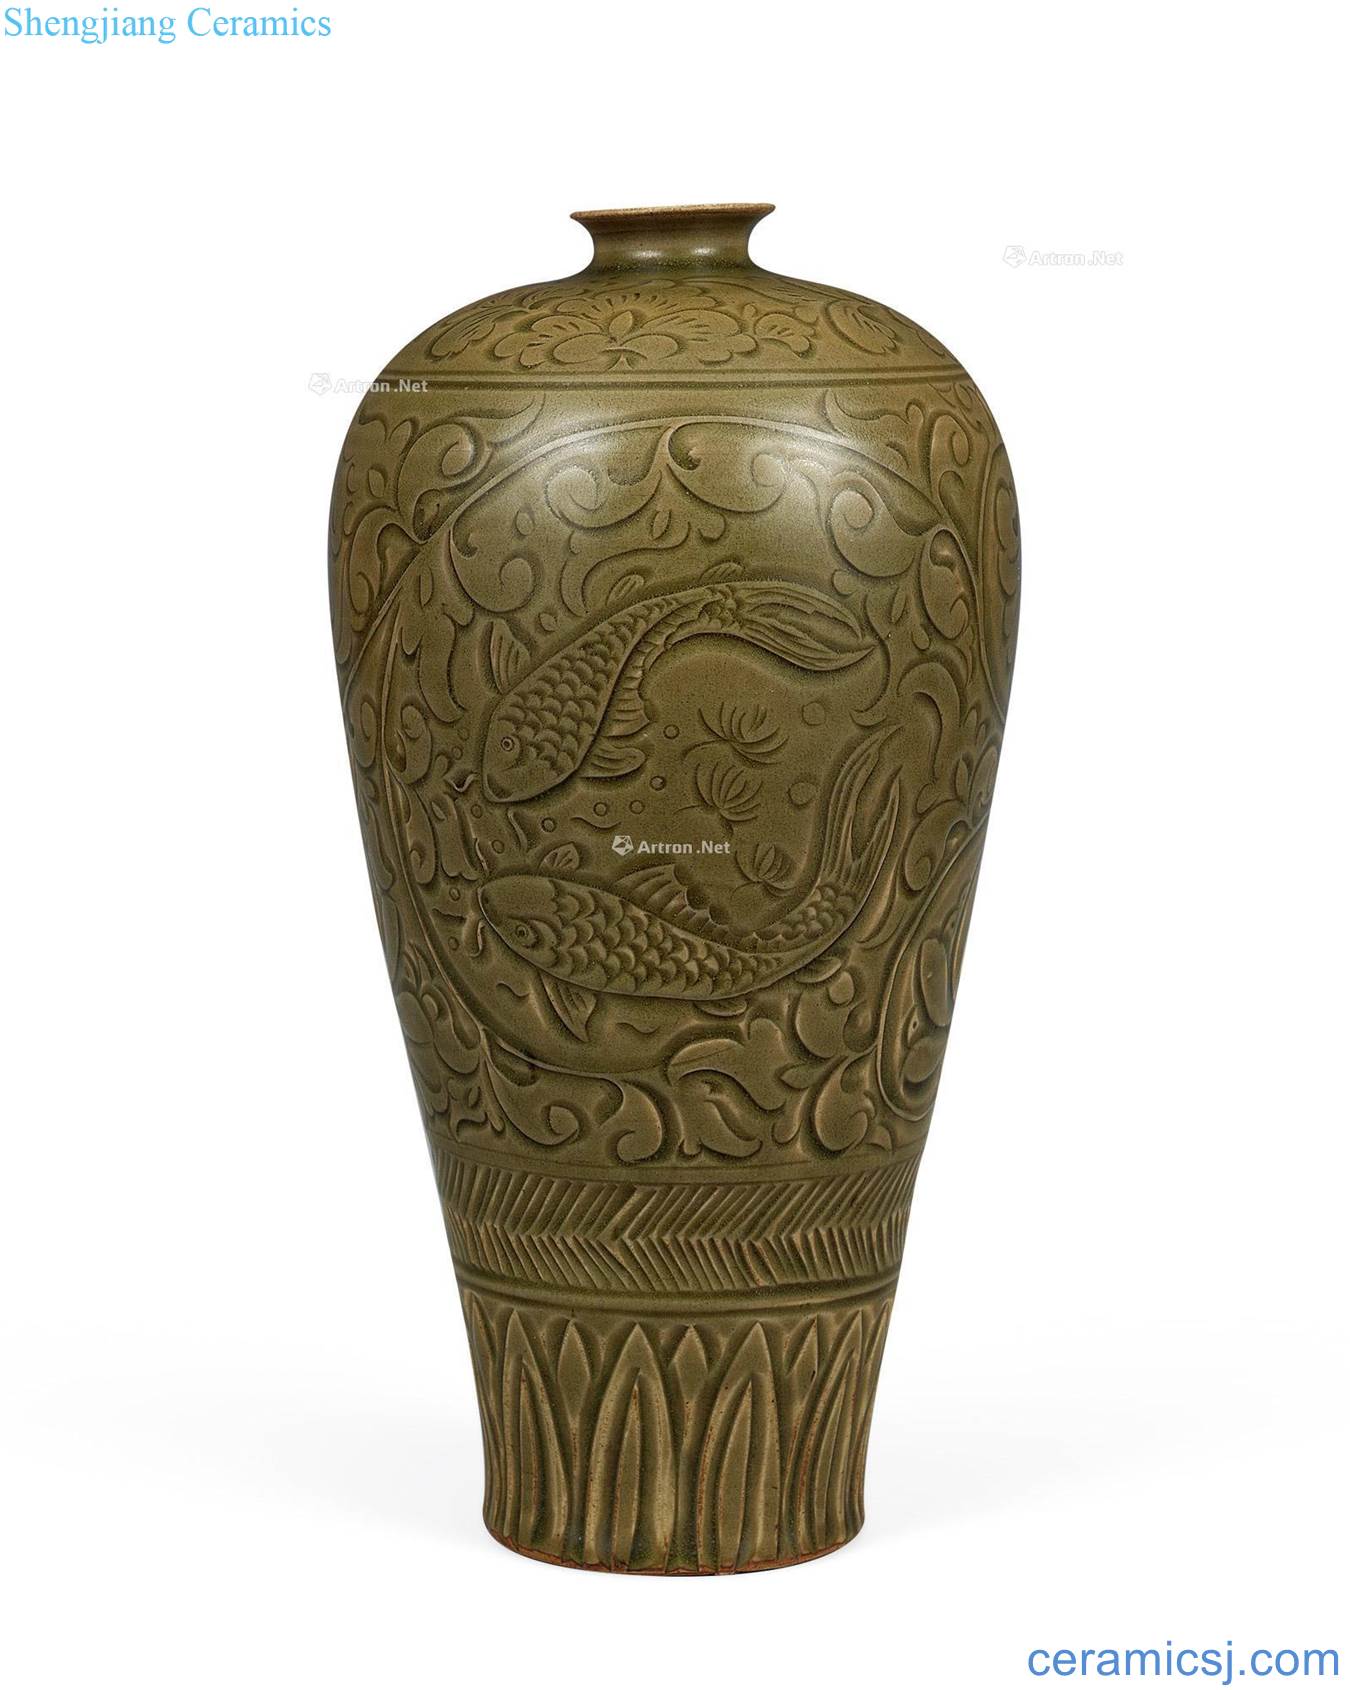 The song dynasty Yao state kiln carved plum bottle